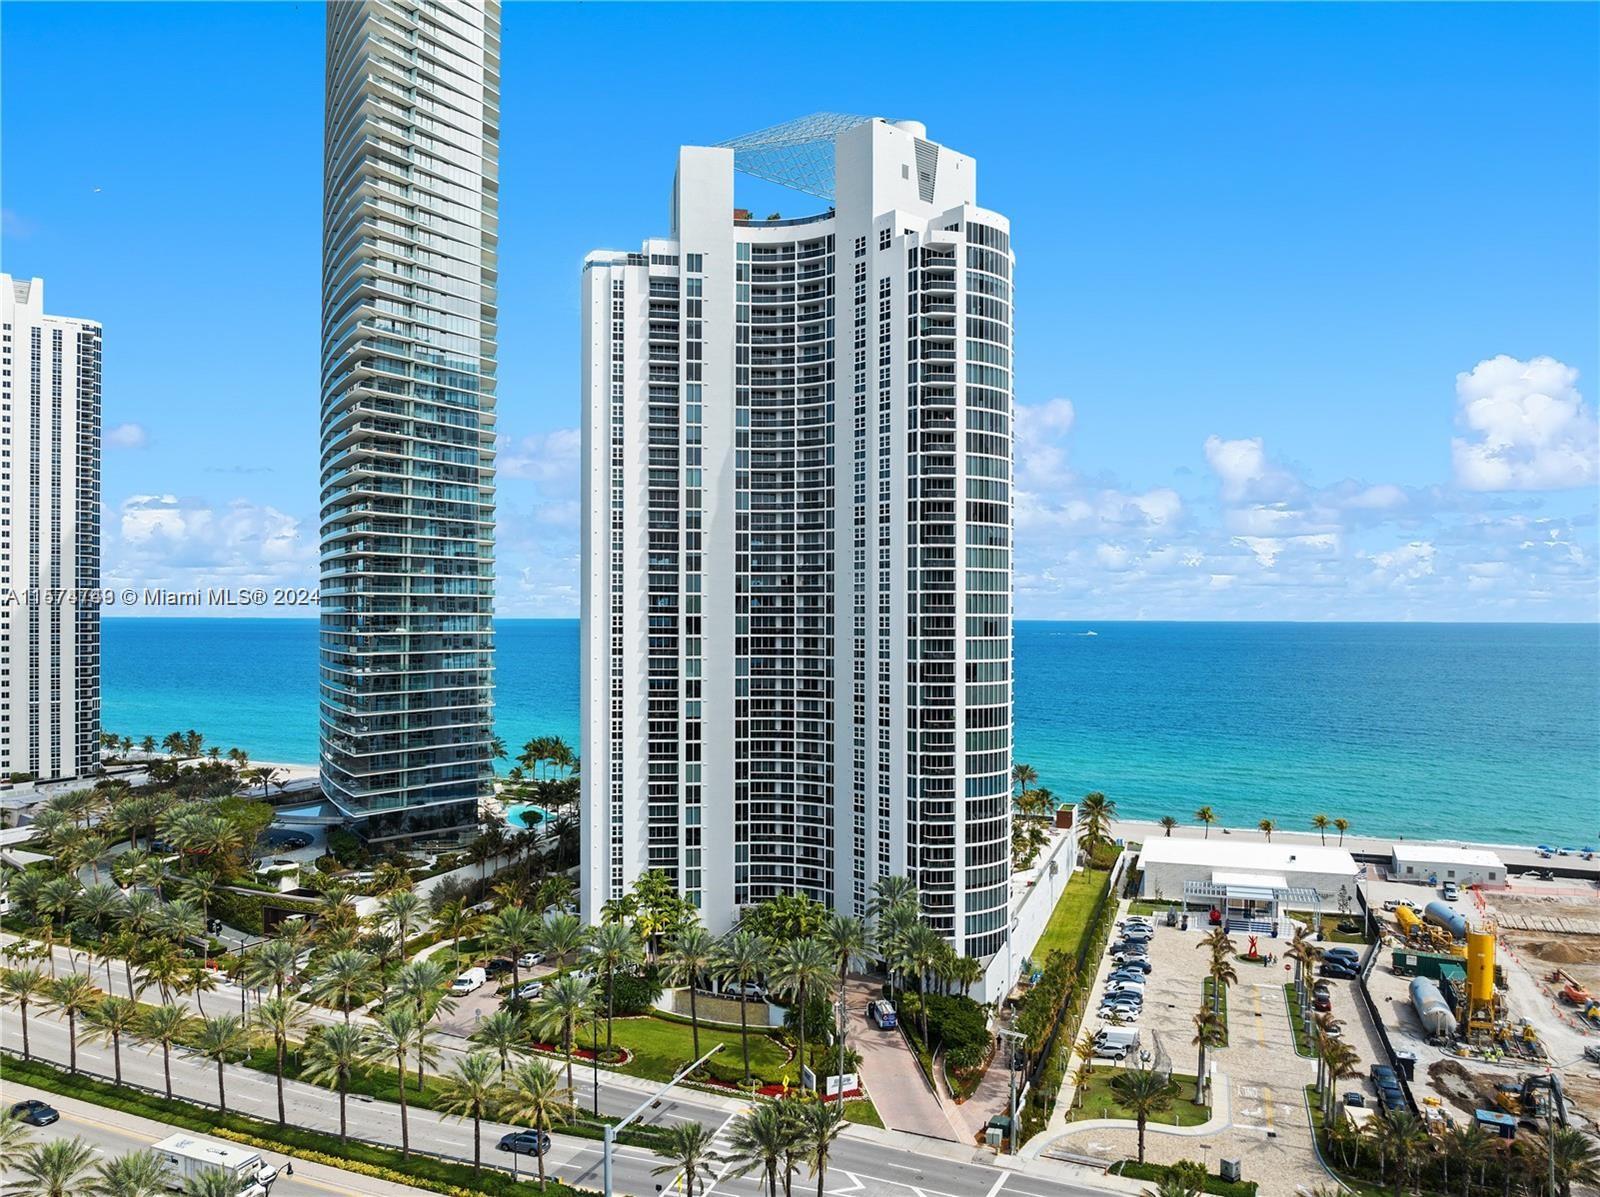 Enjoy stunning ocean & city views from this beautiful 3 bedroom (a den with window has a sleeping sofa and can be used as a third bedroom/office /2.5 bath in the heart of Sunny Isles Beach. Unit is Fully furnished. Step off your elevator to your private foyer.Enjoy your family dinners in the beautiful formal dining room. Modern kitchen has fabulous views of the city, master bedroom has huge walk in closets & bathroom with double sink vanity.Split bedroom floorplan.The unit is flow through with East &West balconies. Very modern & gorgeous Condo minutes from Aventura Mall &Bal Harbour shops.Fabulous amenities including full beach &pool service,bistro bar,tennis courts,party room,rooftop jacuzzi,spa,gym,valet,24hr security & more.Hurry,this is the life of reach & famous!!!